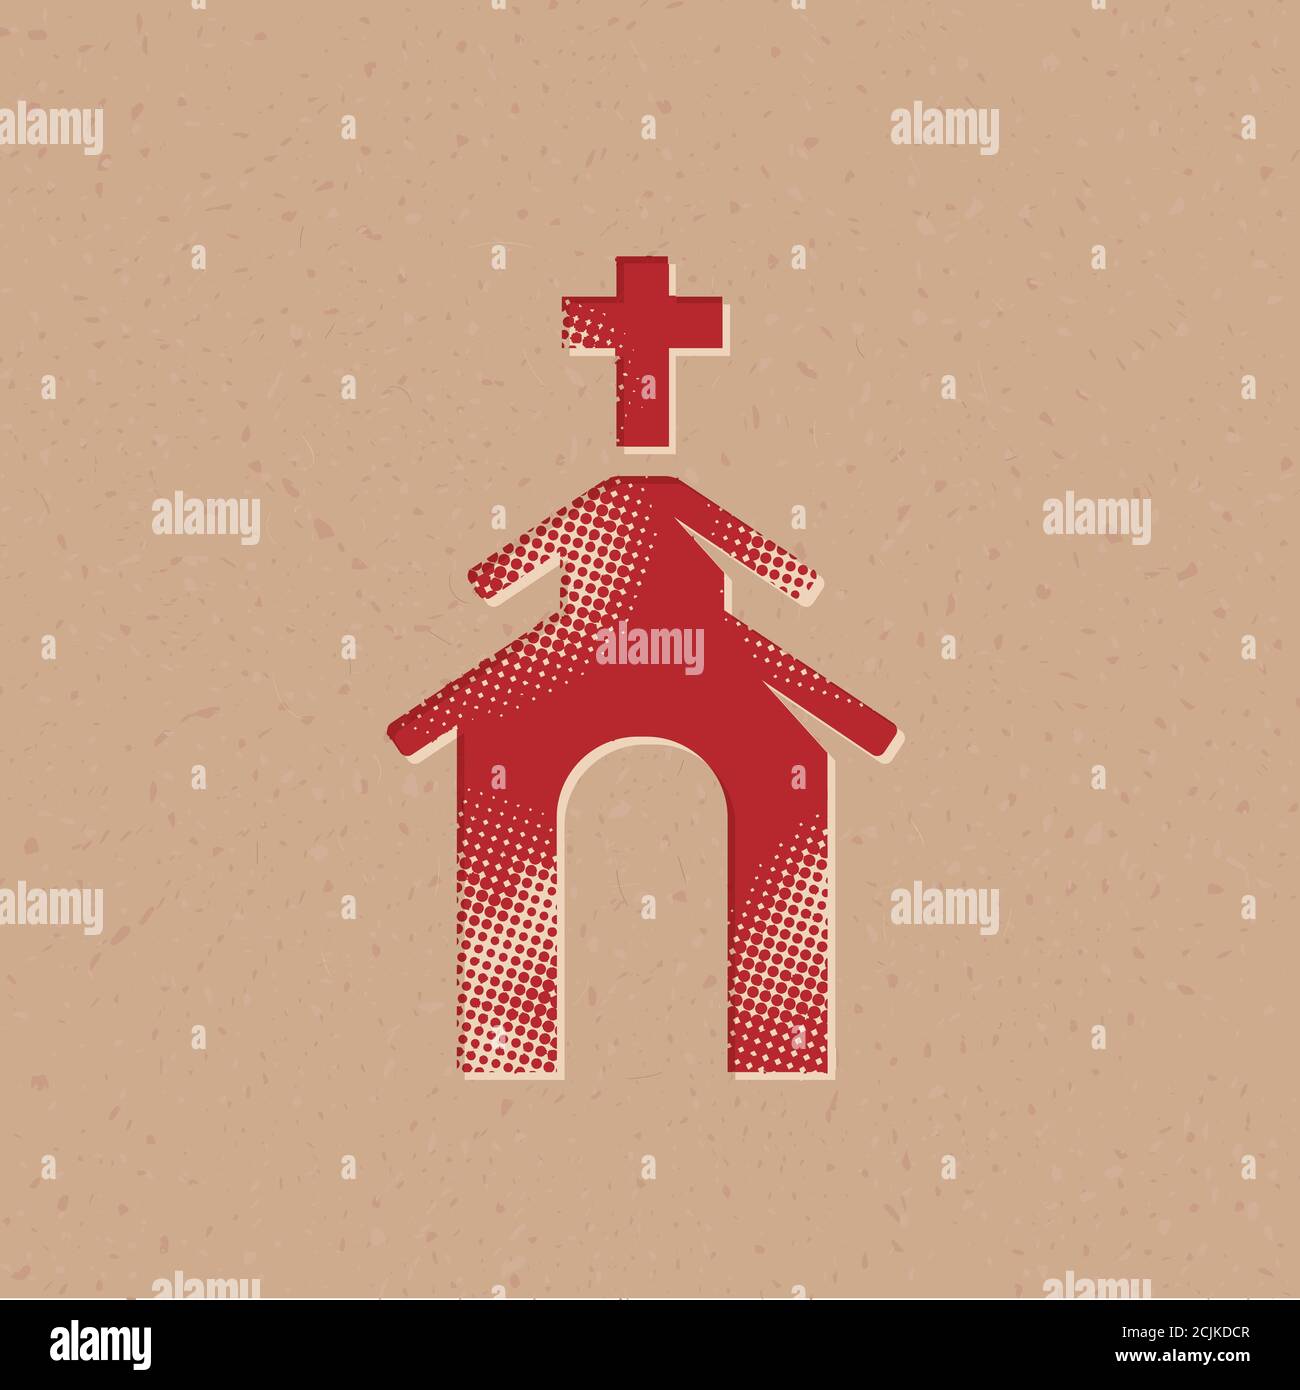 Church icon in halftone style. Grunge background vector illustration. Stock Vector